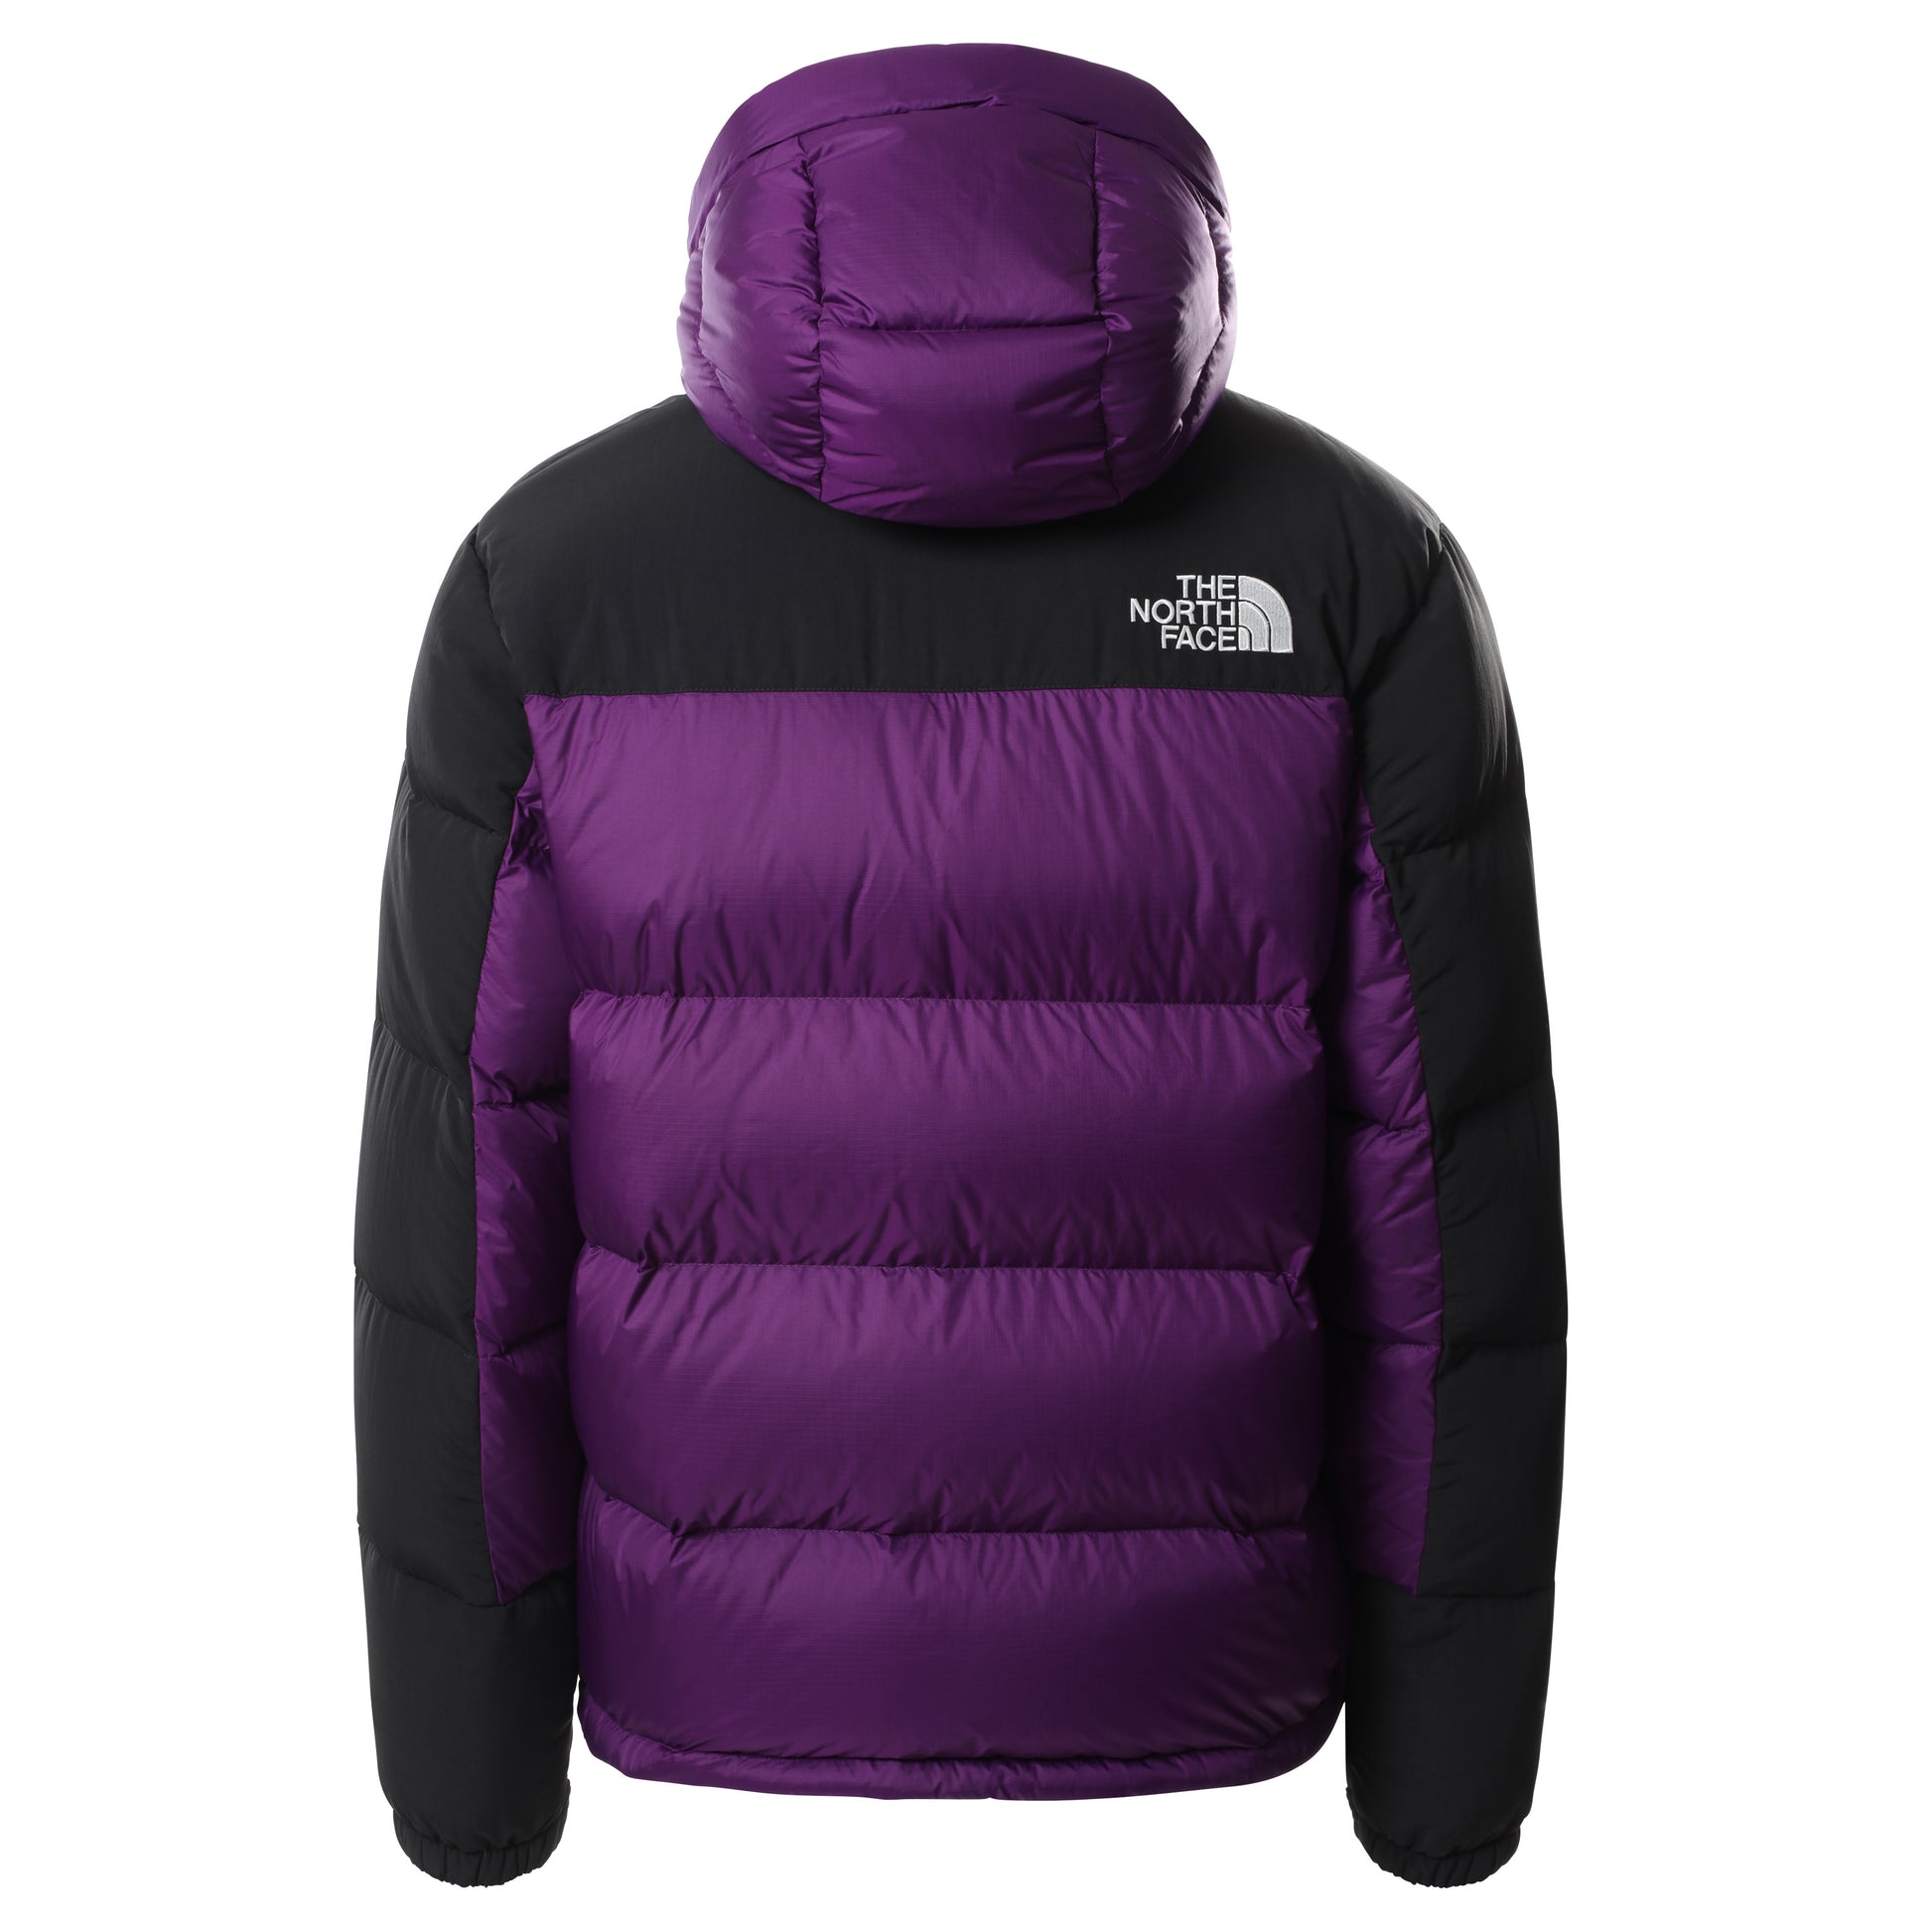 THE NORTH FACE CHAQUETA HIMALAYAN - TNF PURPLE freeshipping - FREESTYLE LLORET